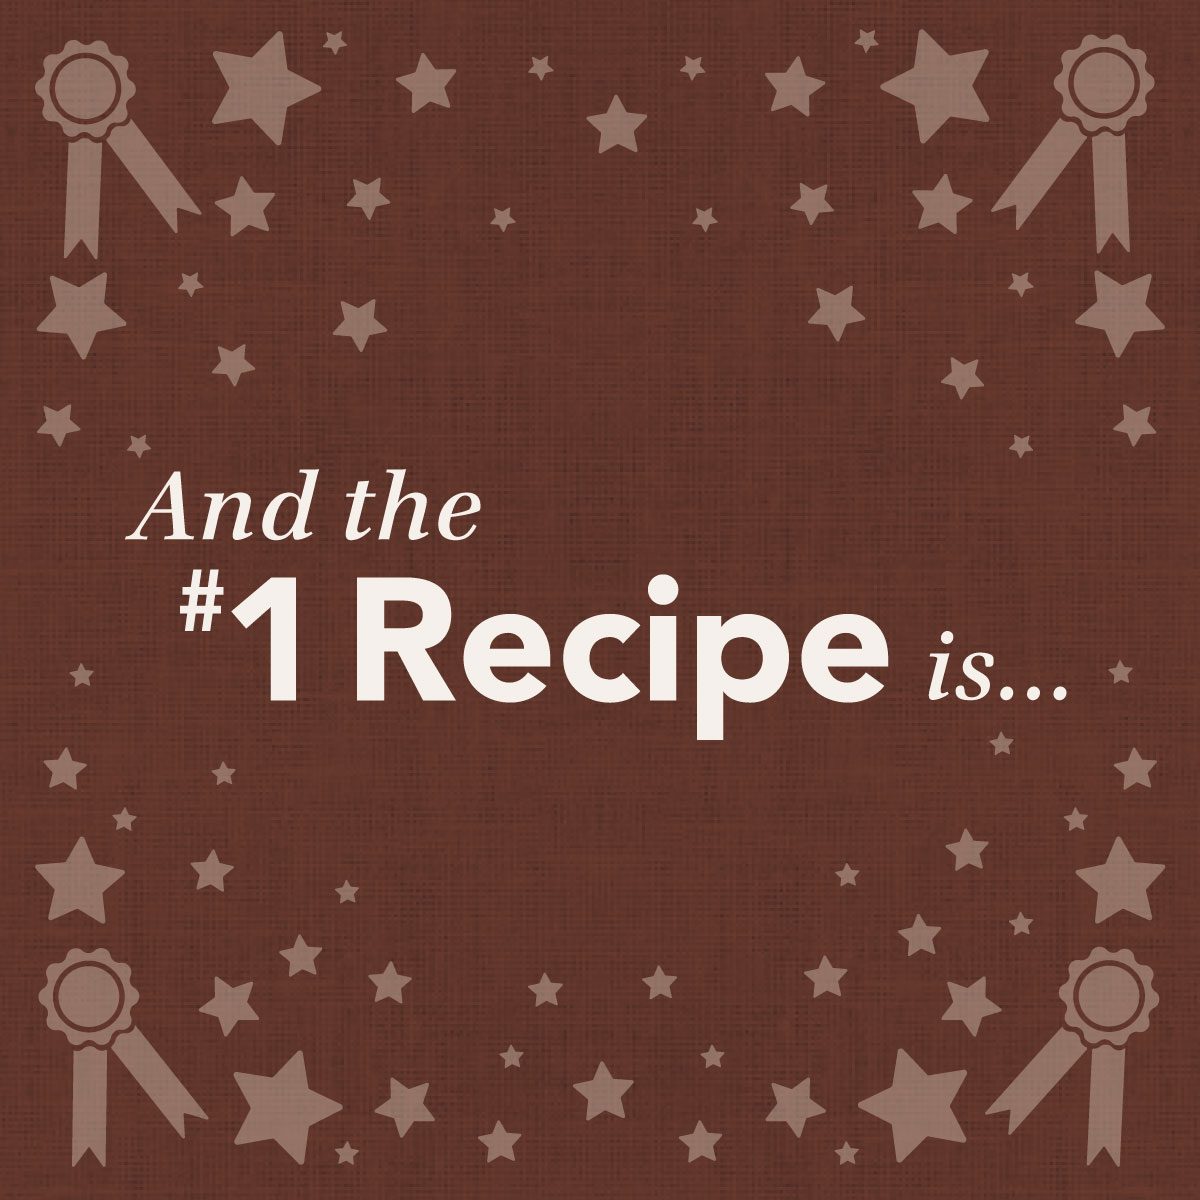 And the #1 Recipe is...